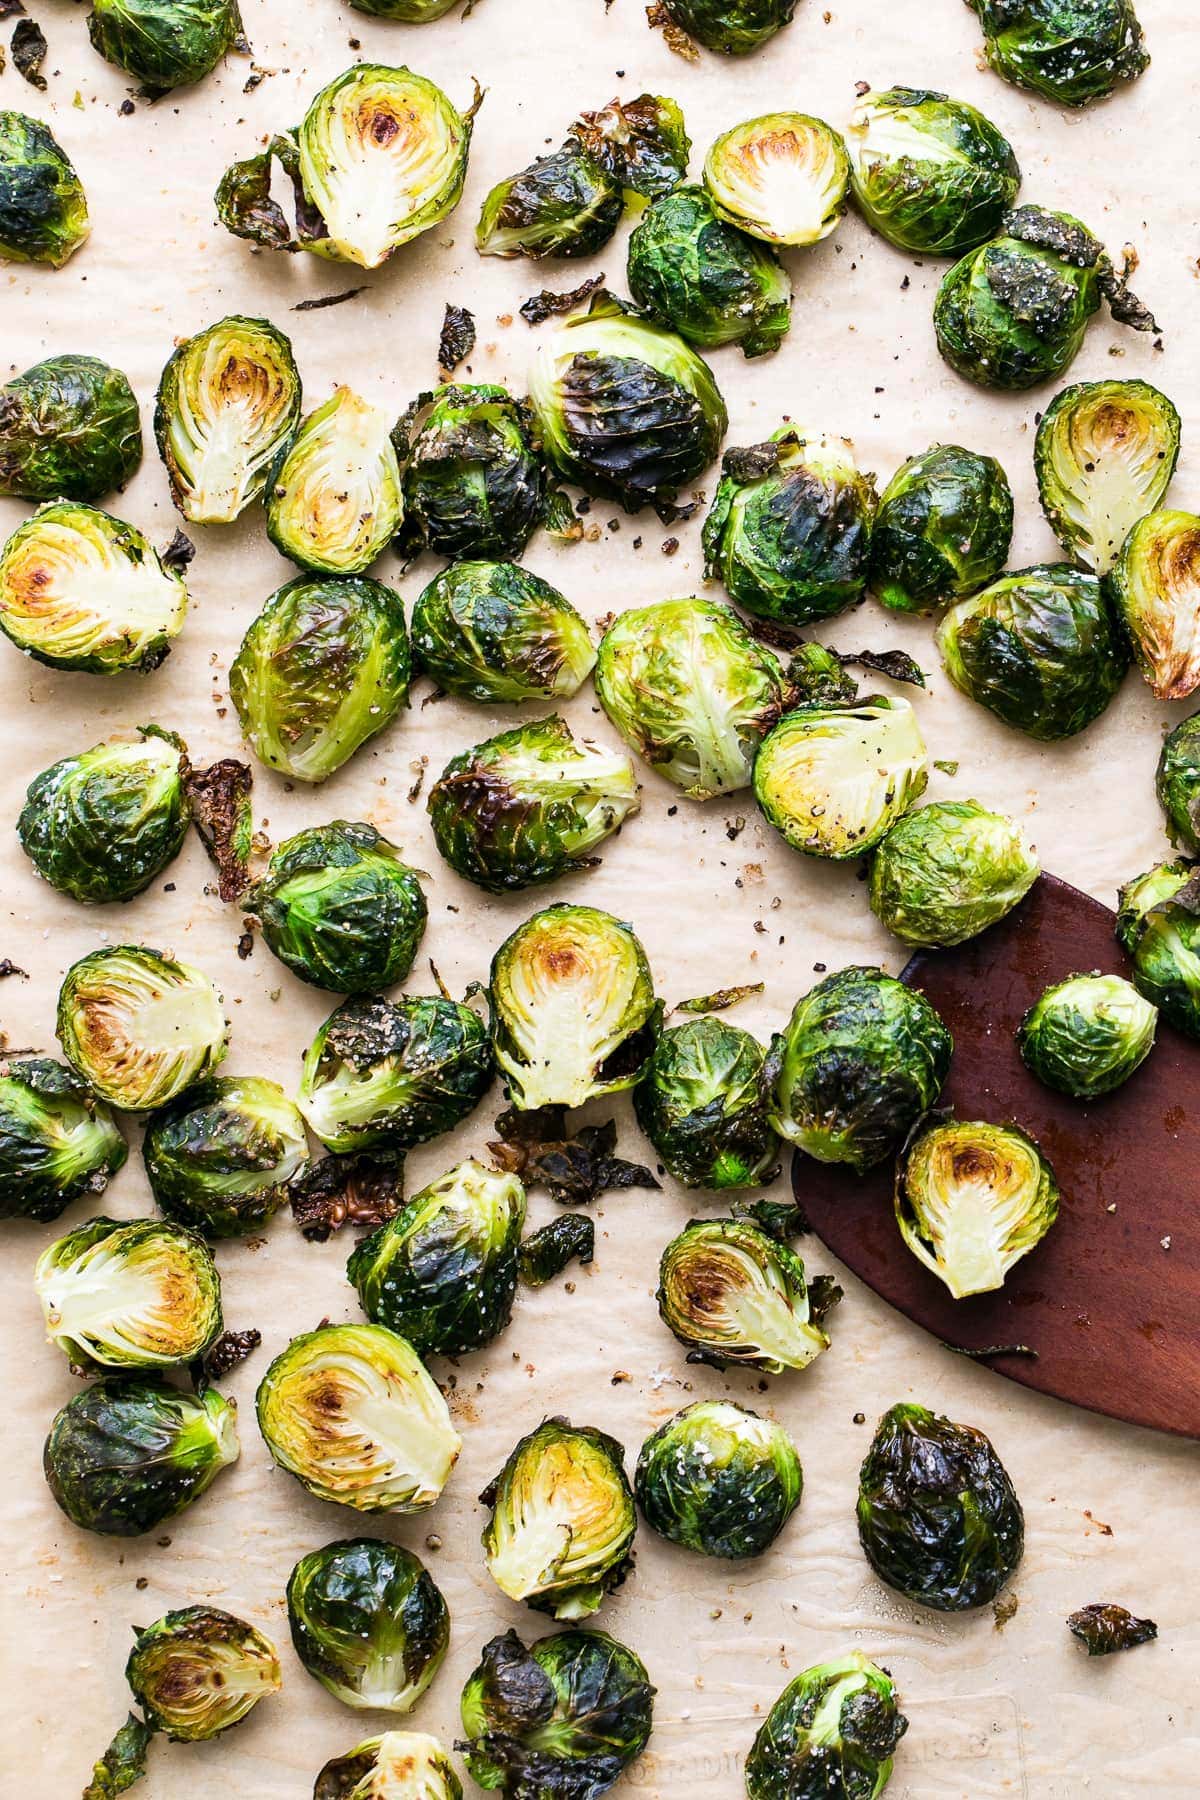 top down view of freshly roasted brussels sprouts on baking sheet with wooden spatula.